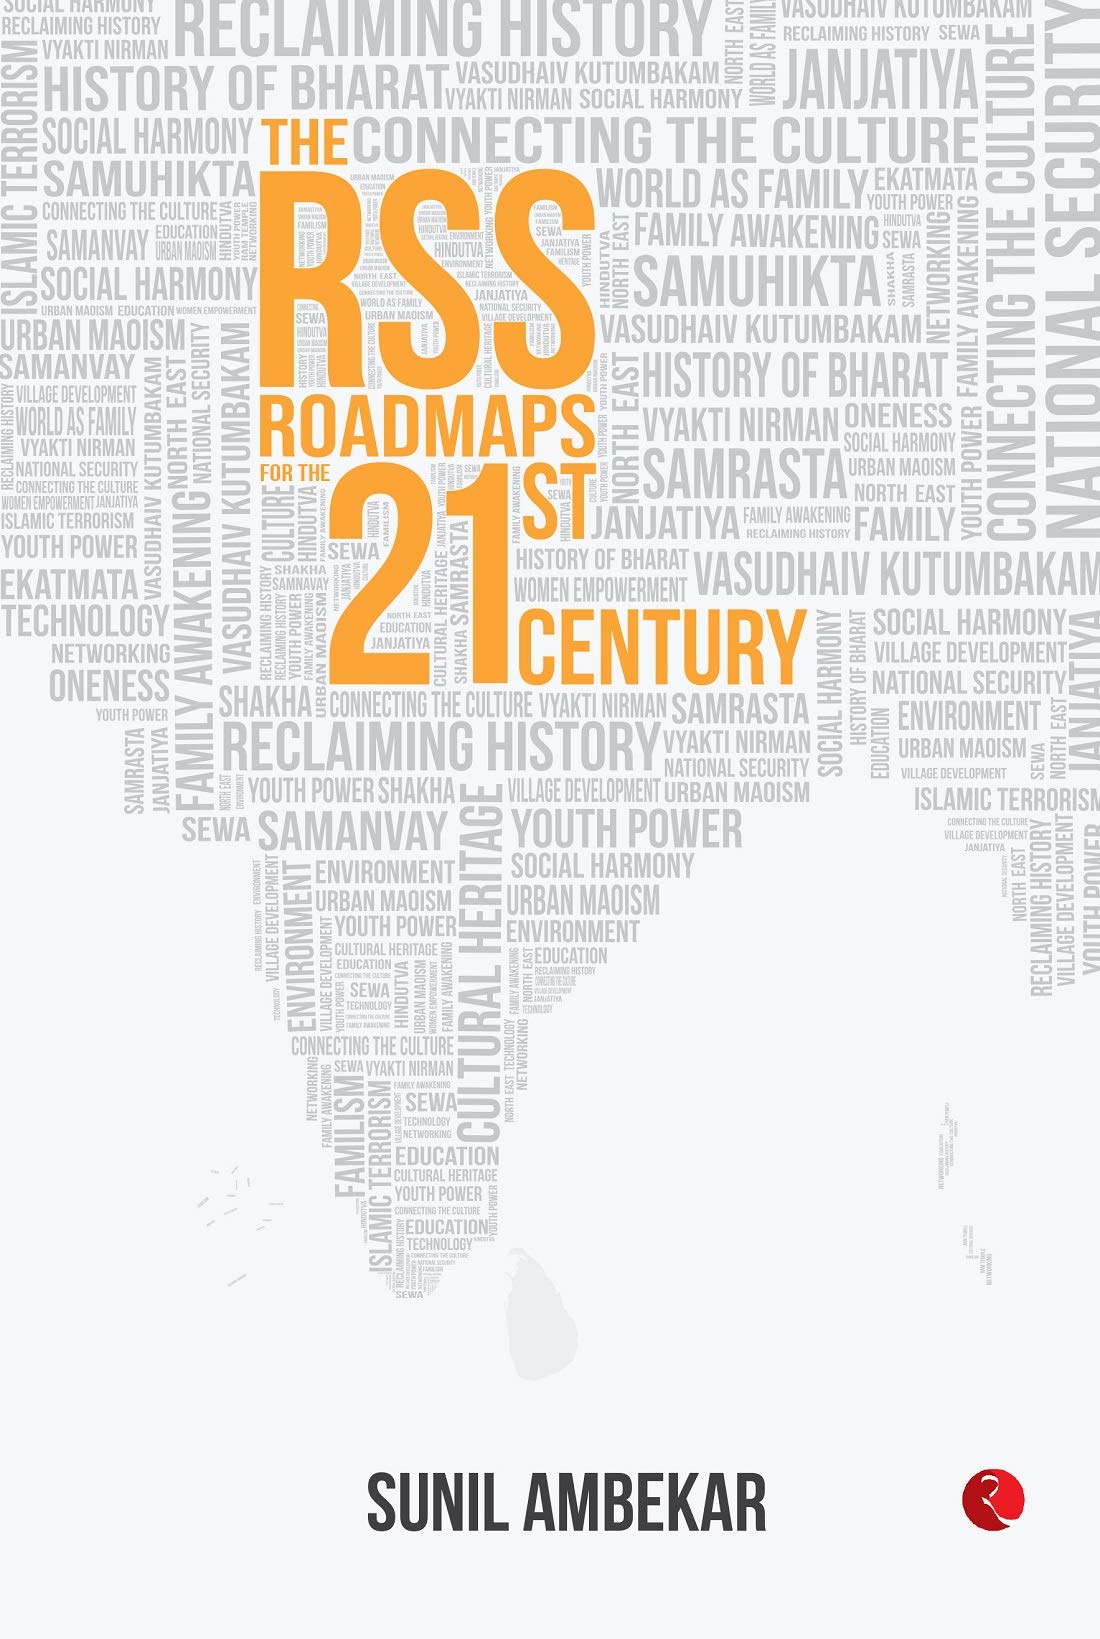 RSS FOR THE 21ST CENTURY